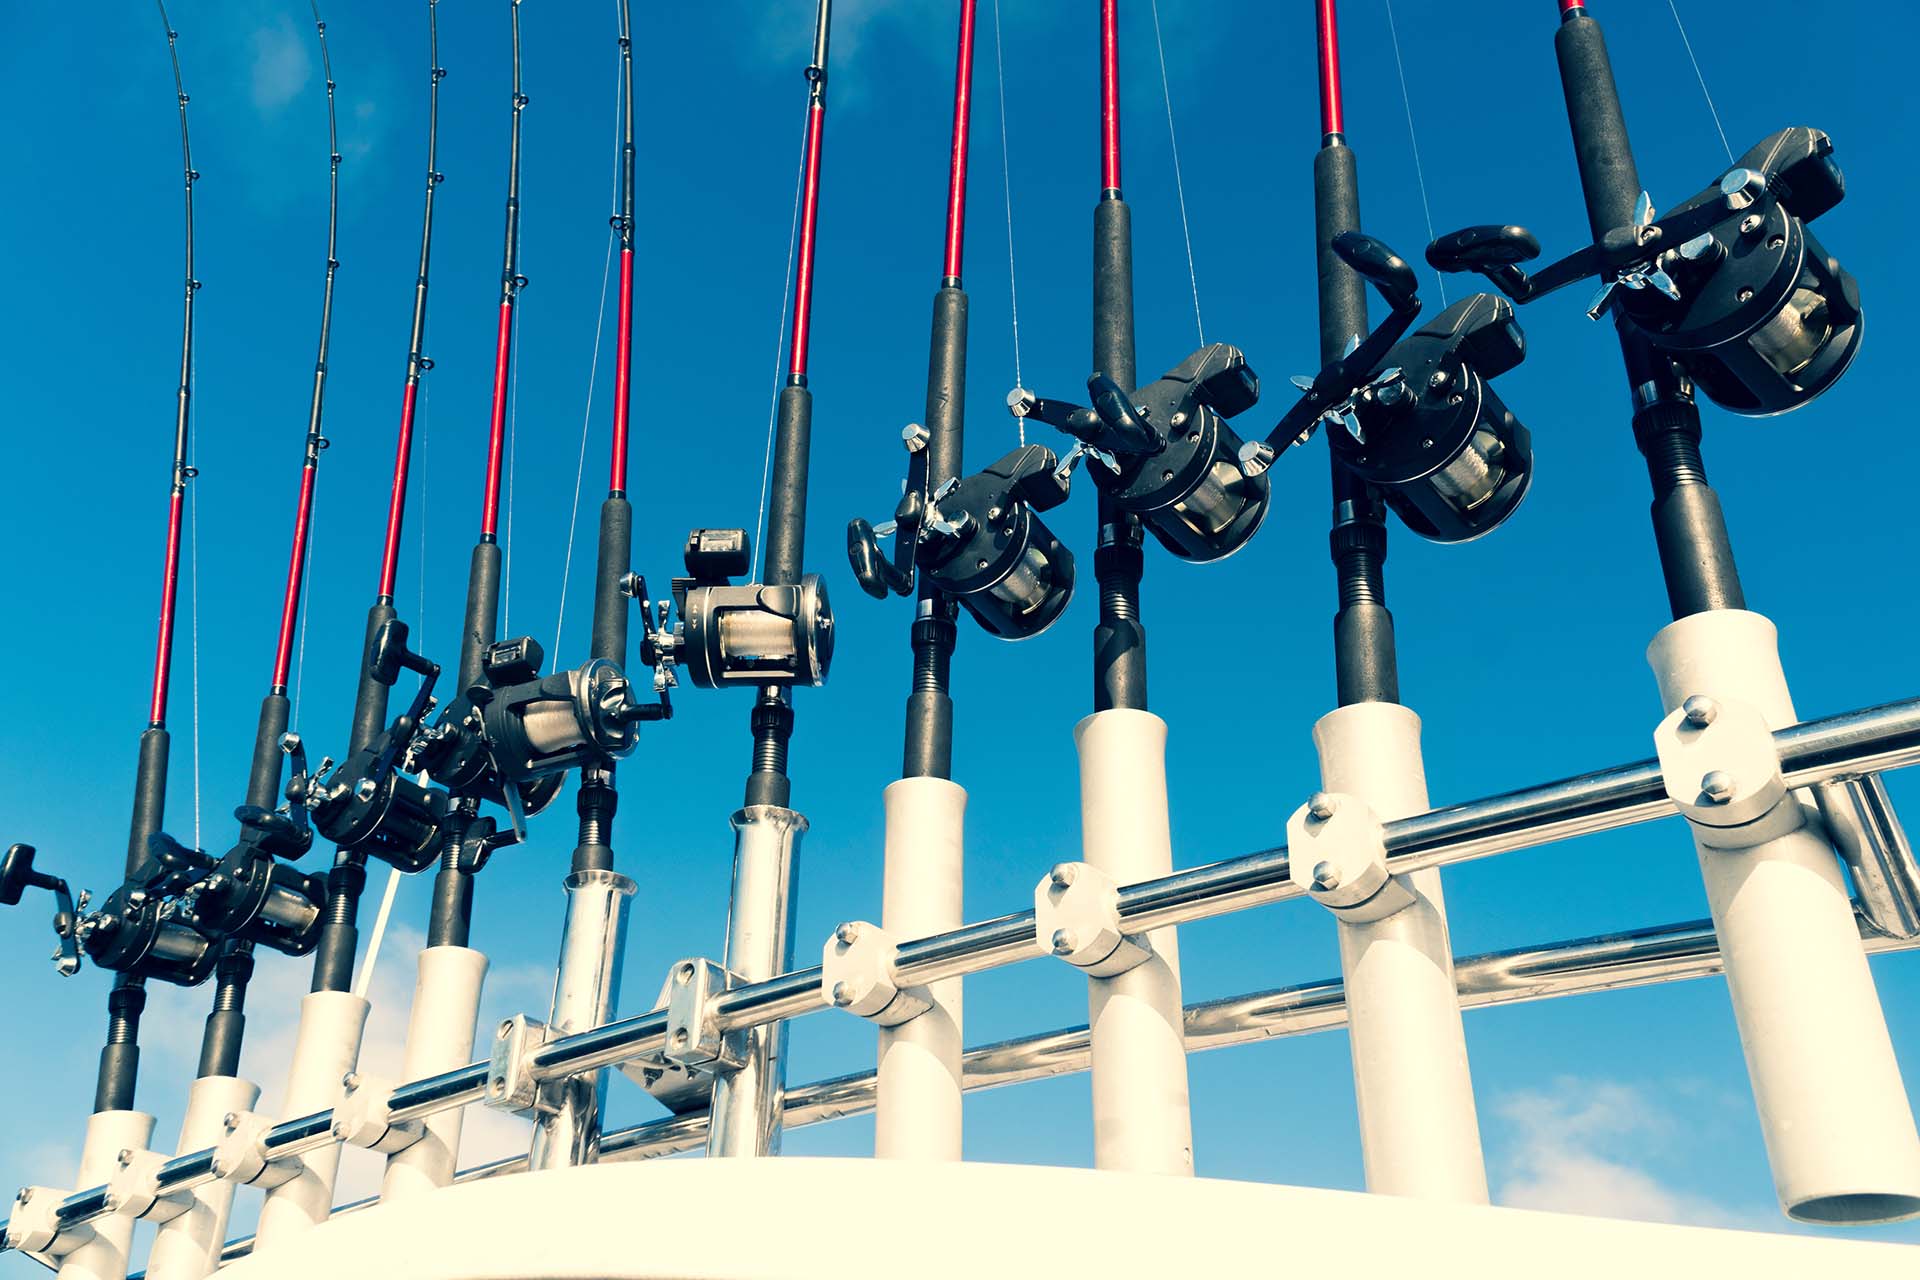 Fishing trolling boat rods in rod holder. Big game fishing. Fishing reels and rods pattern on boat. Sea fishing rods and reels in a row